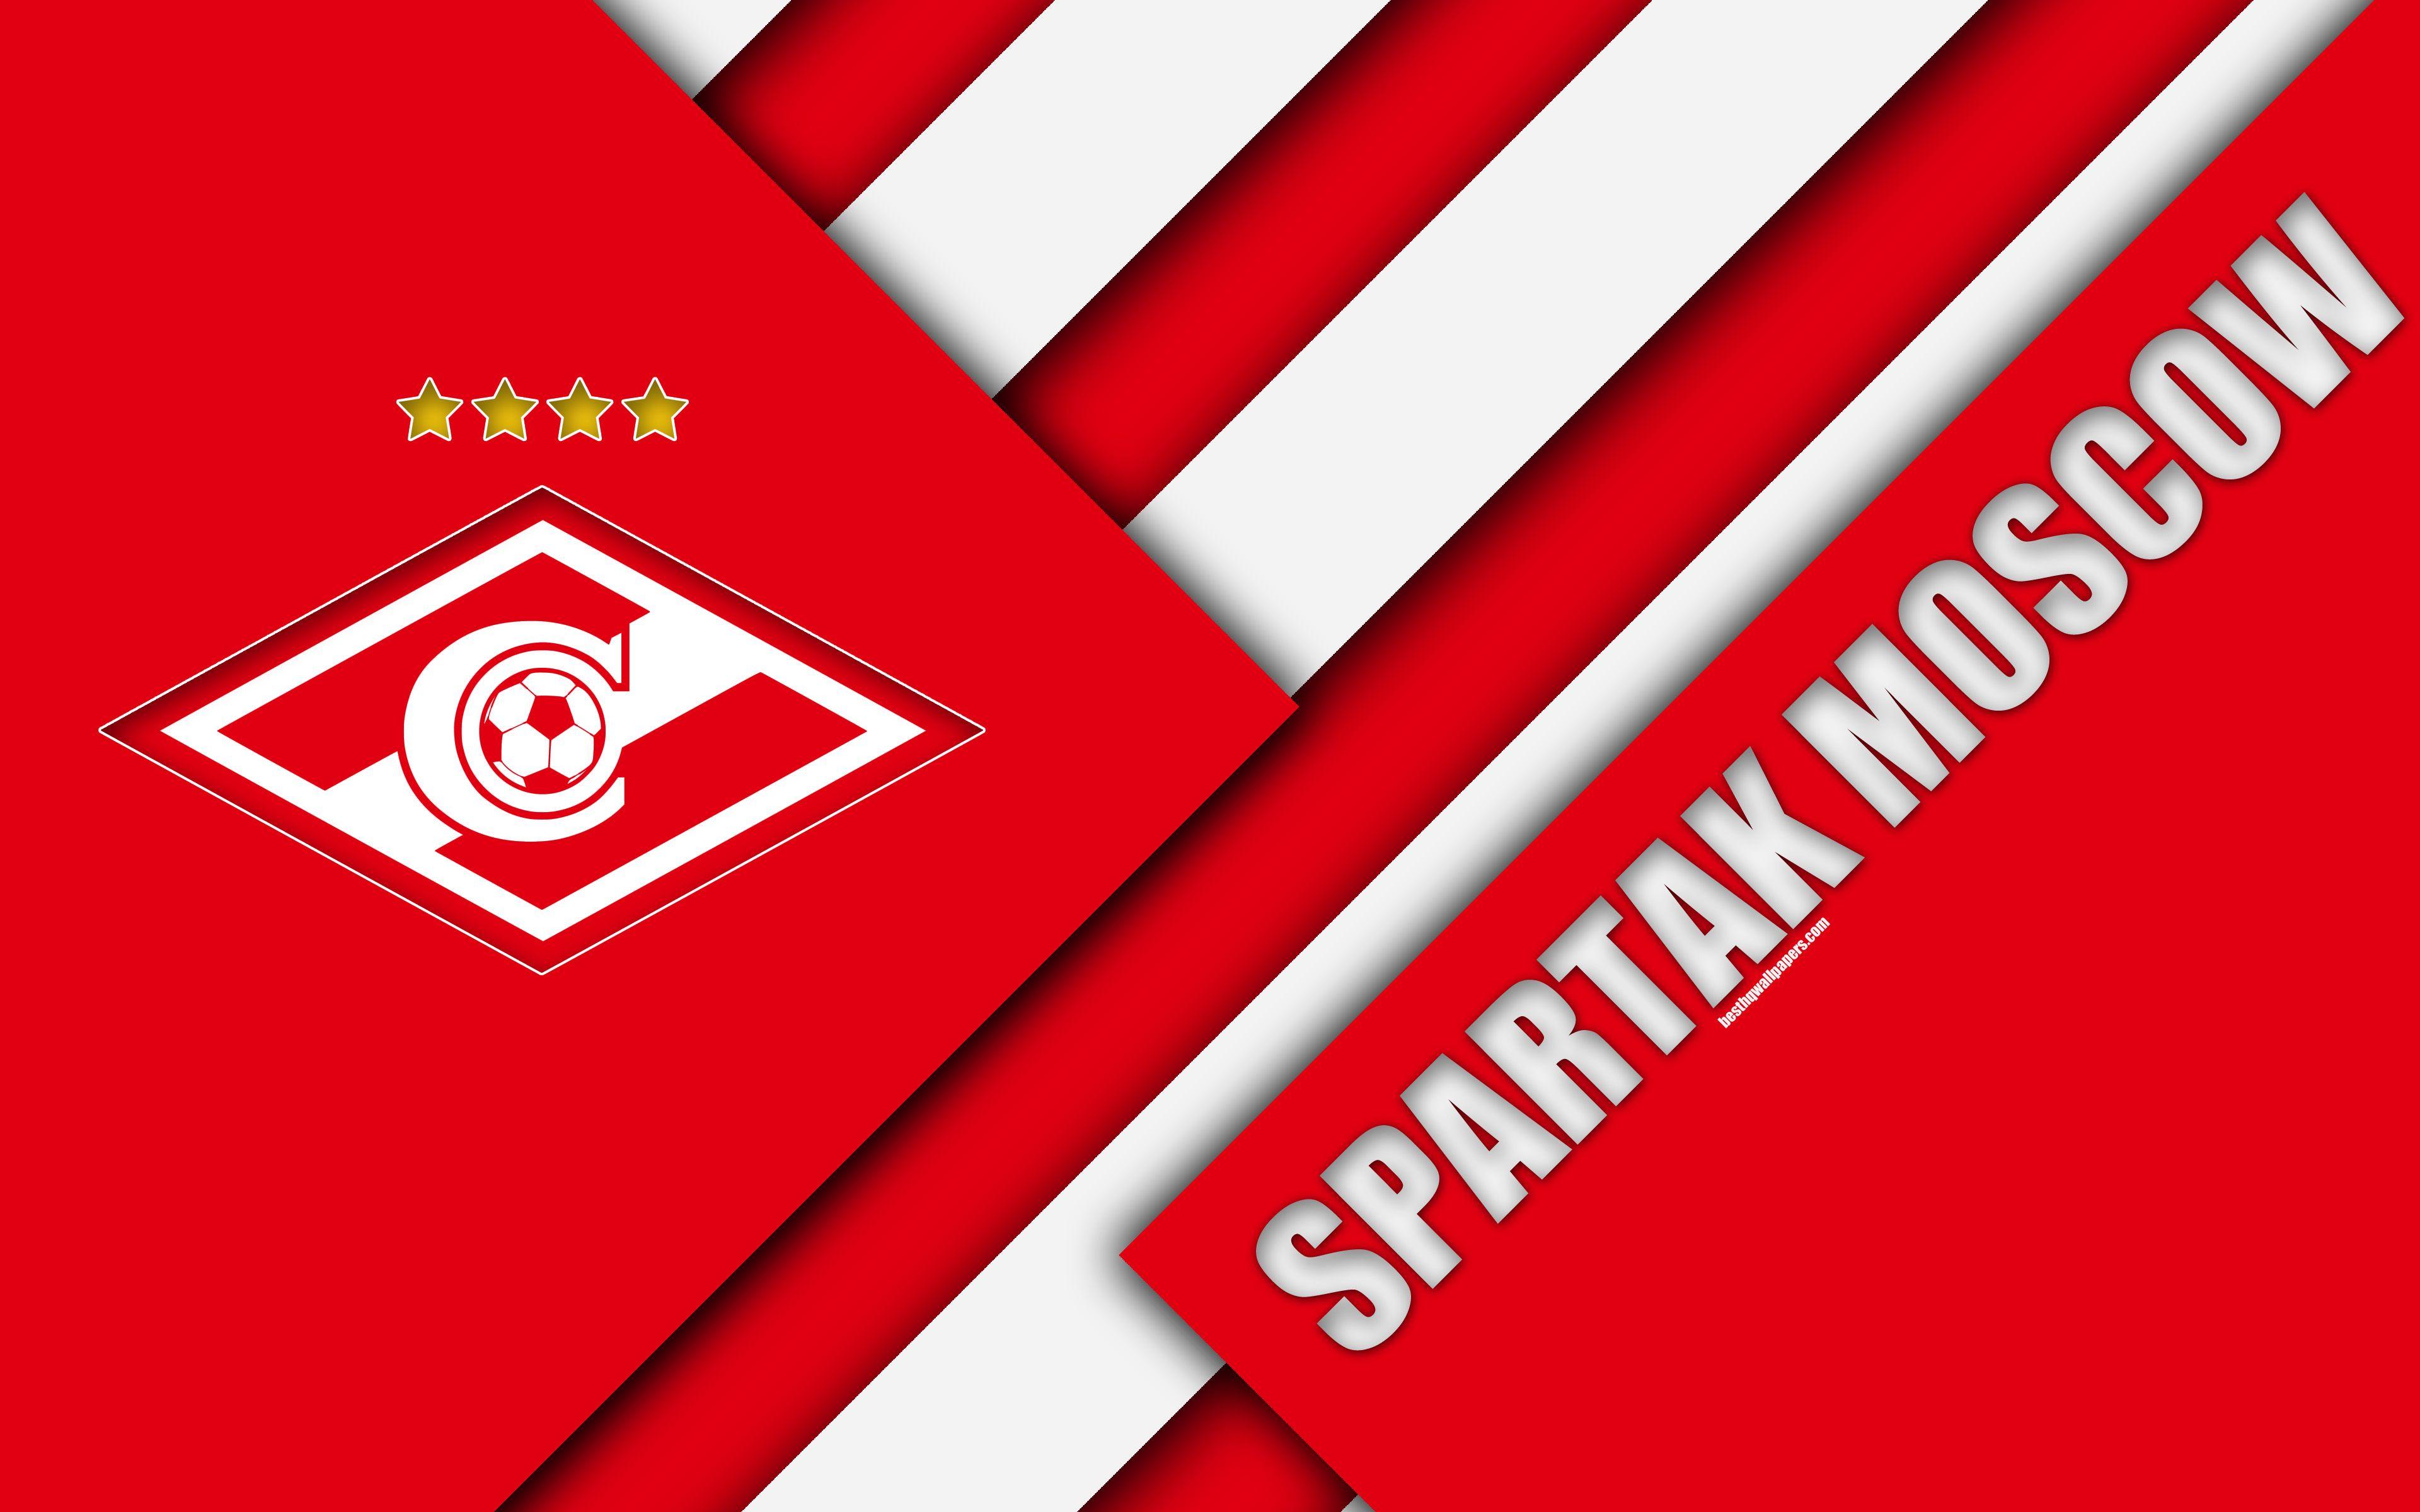 Download wallpaper FC Spartak Moscow, 4k, material design, red